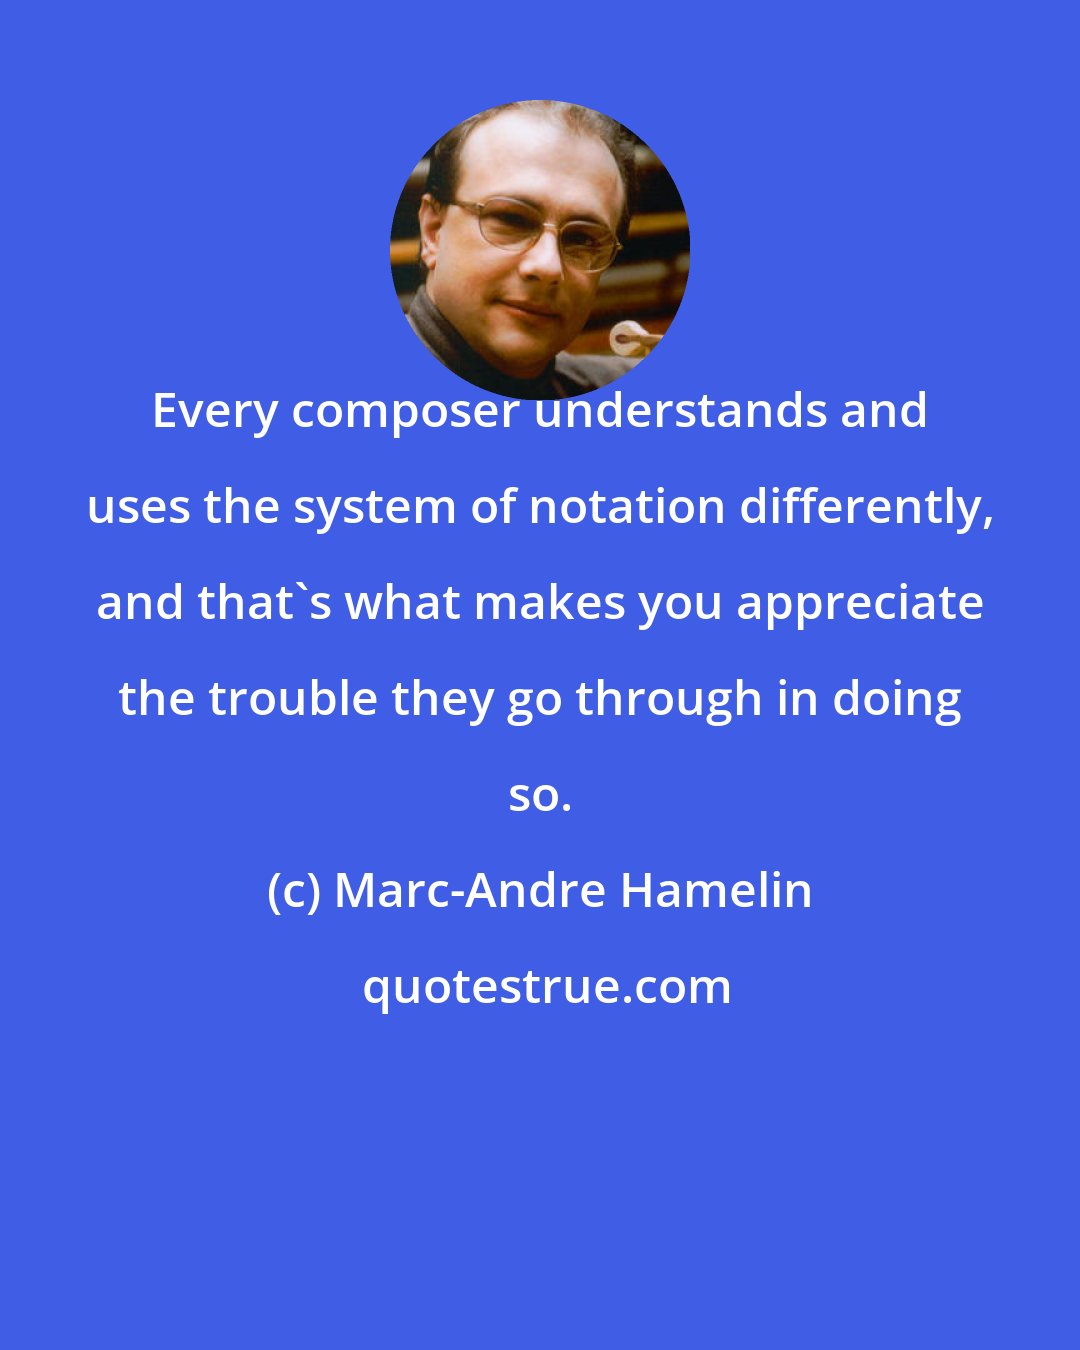 Marc-Andre Hamelin: Every composer understands and uses the system of notation differently, and that's what makes you appreciate the trouble they go through in doing so.